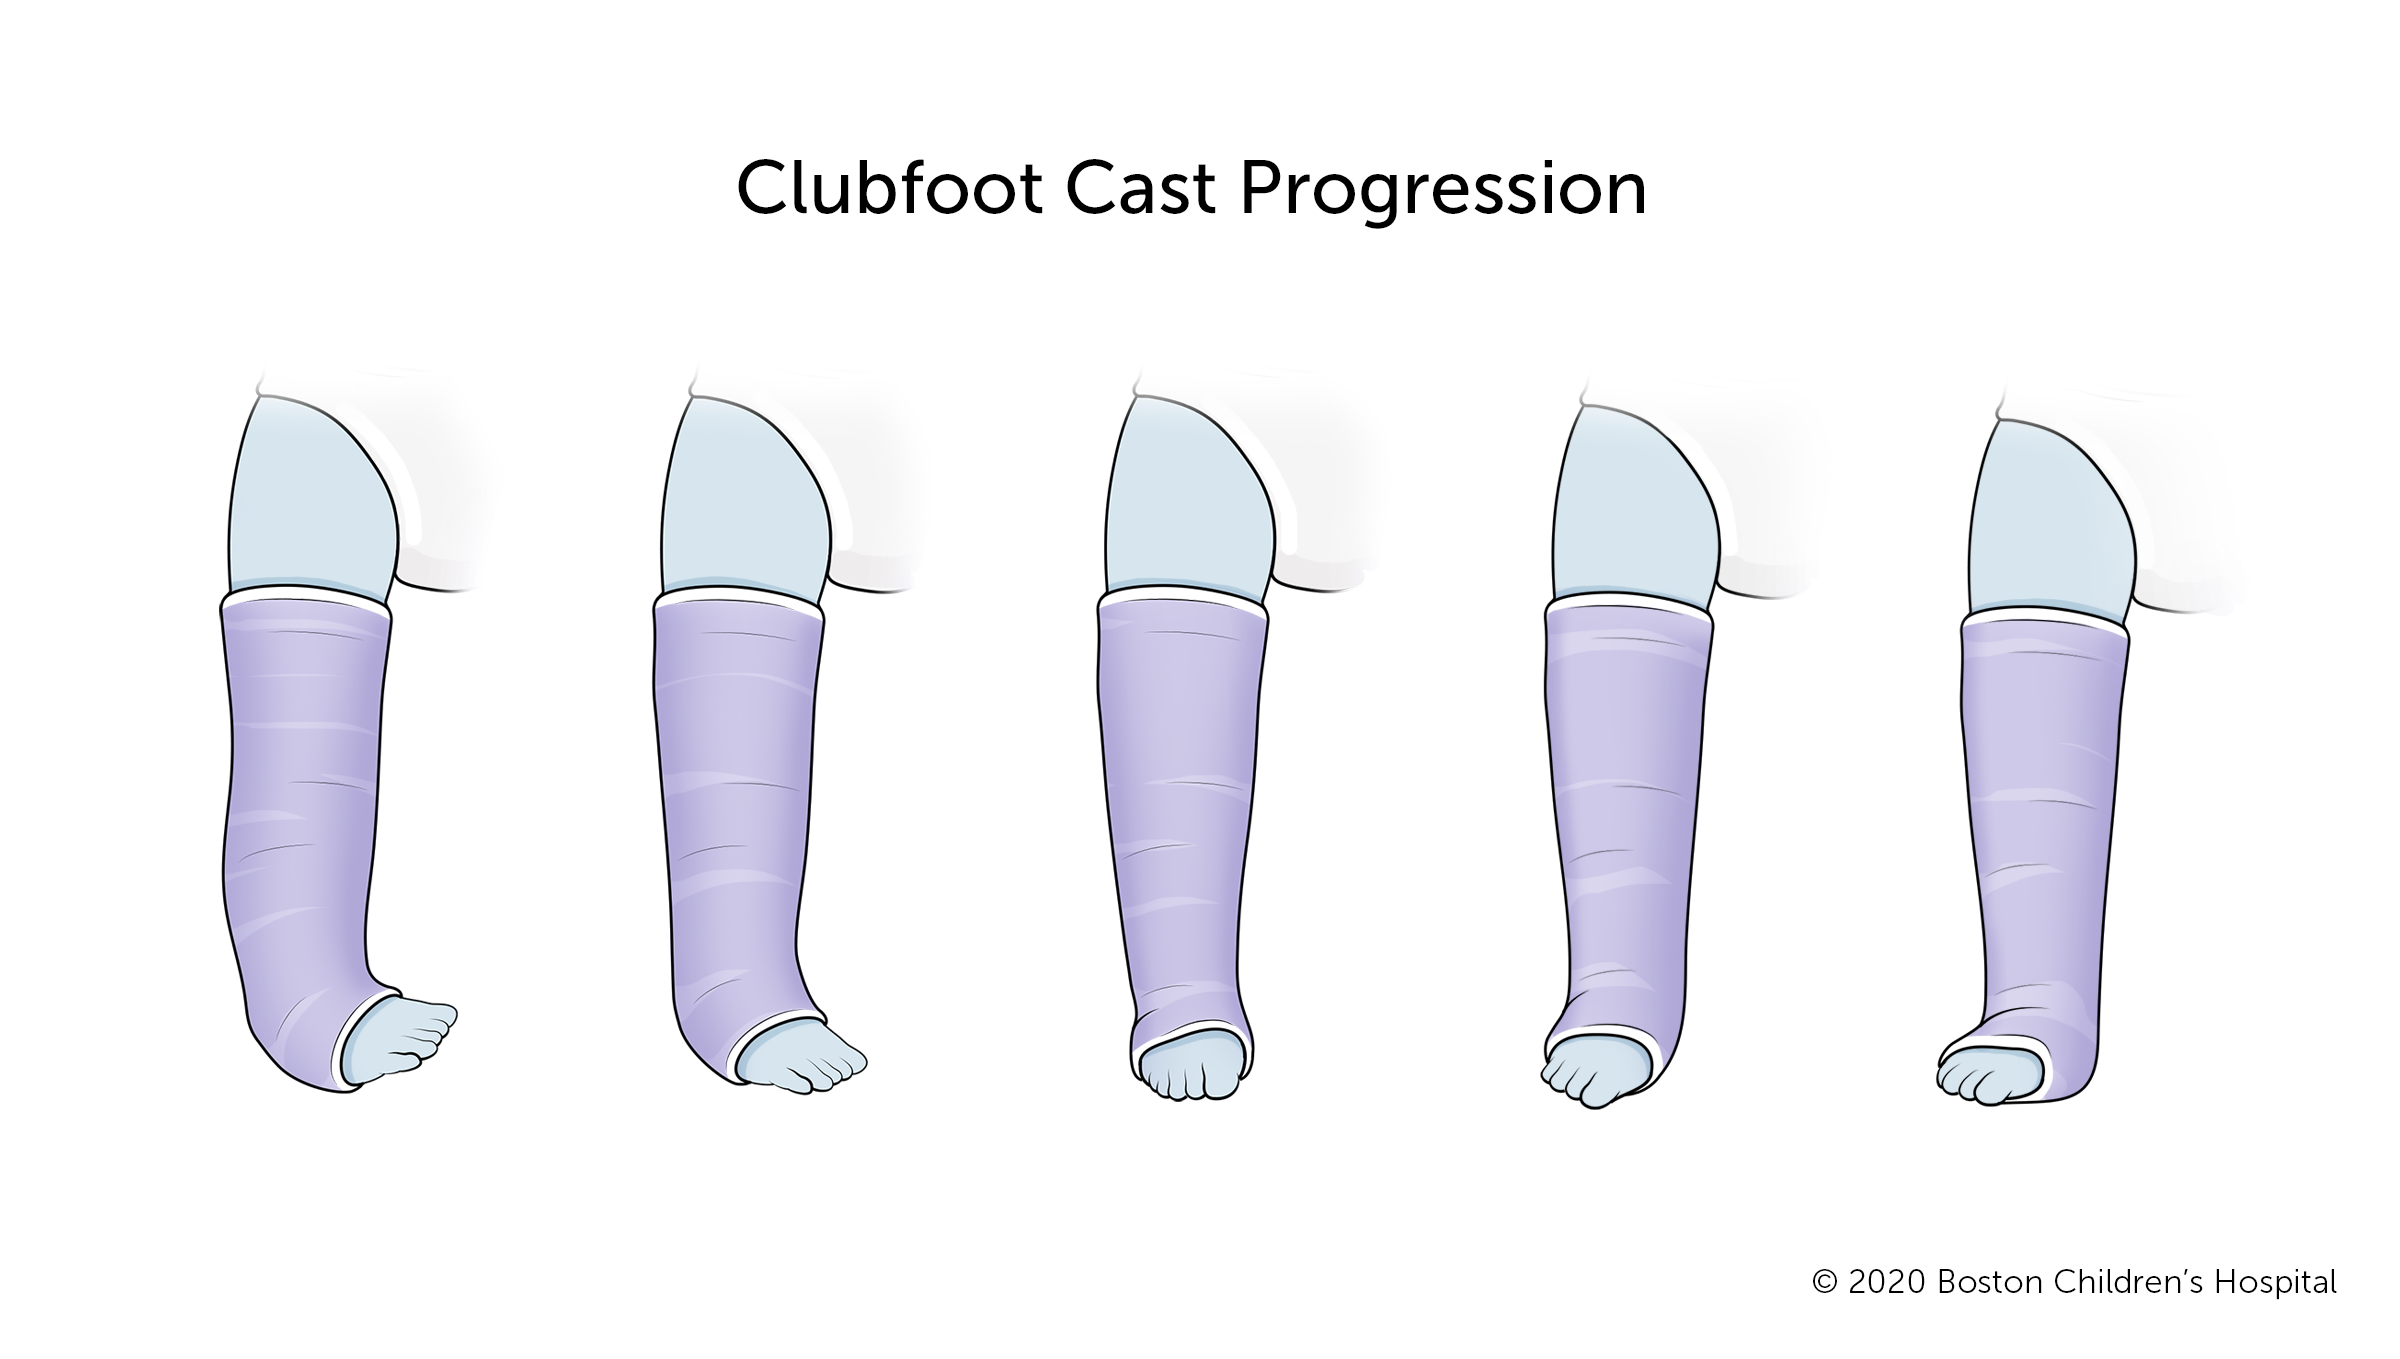 This is how clubfoot progresses during casting.